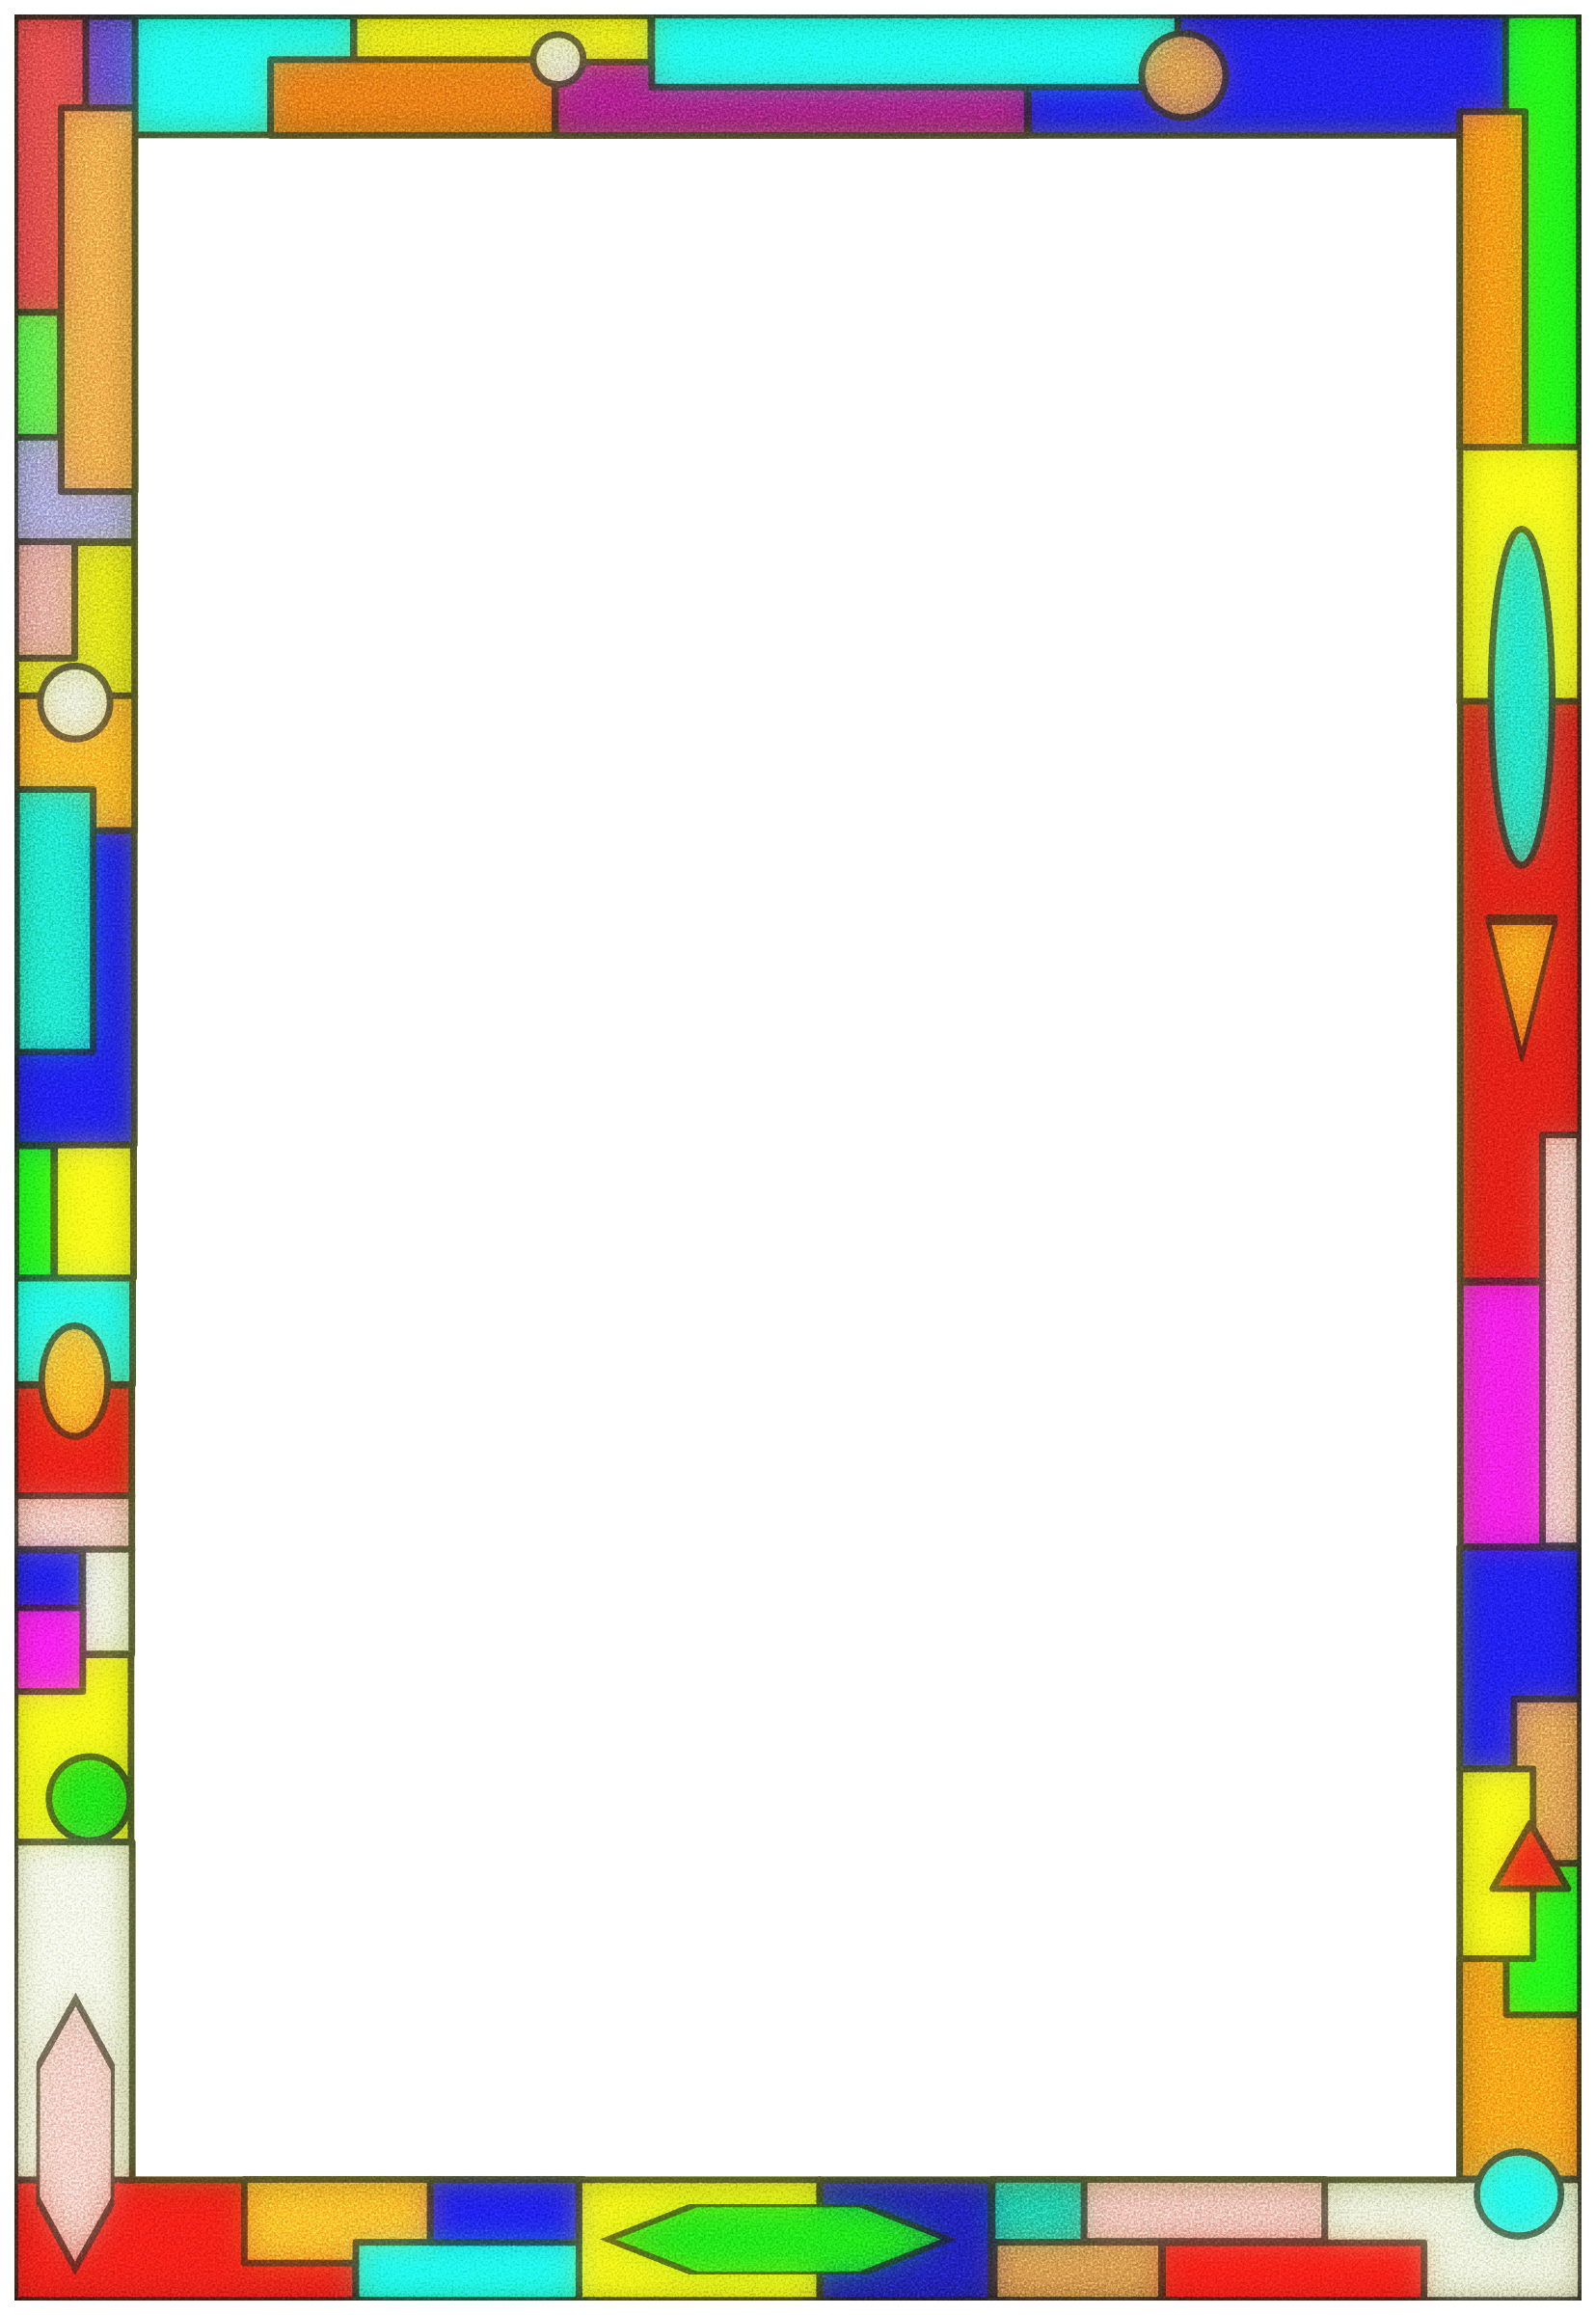 Stained glass border big. People clipart borders